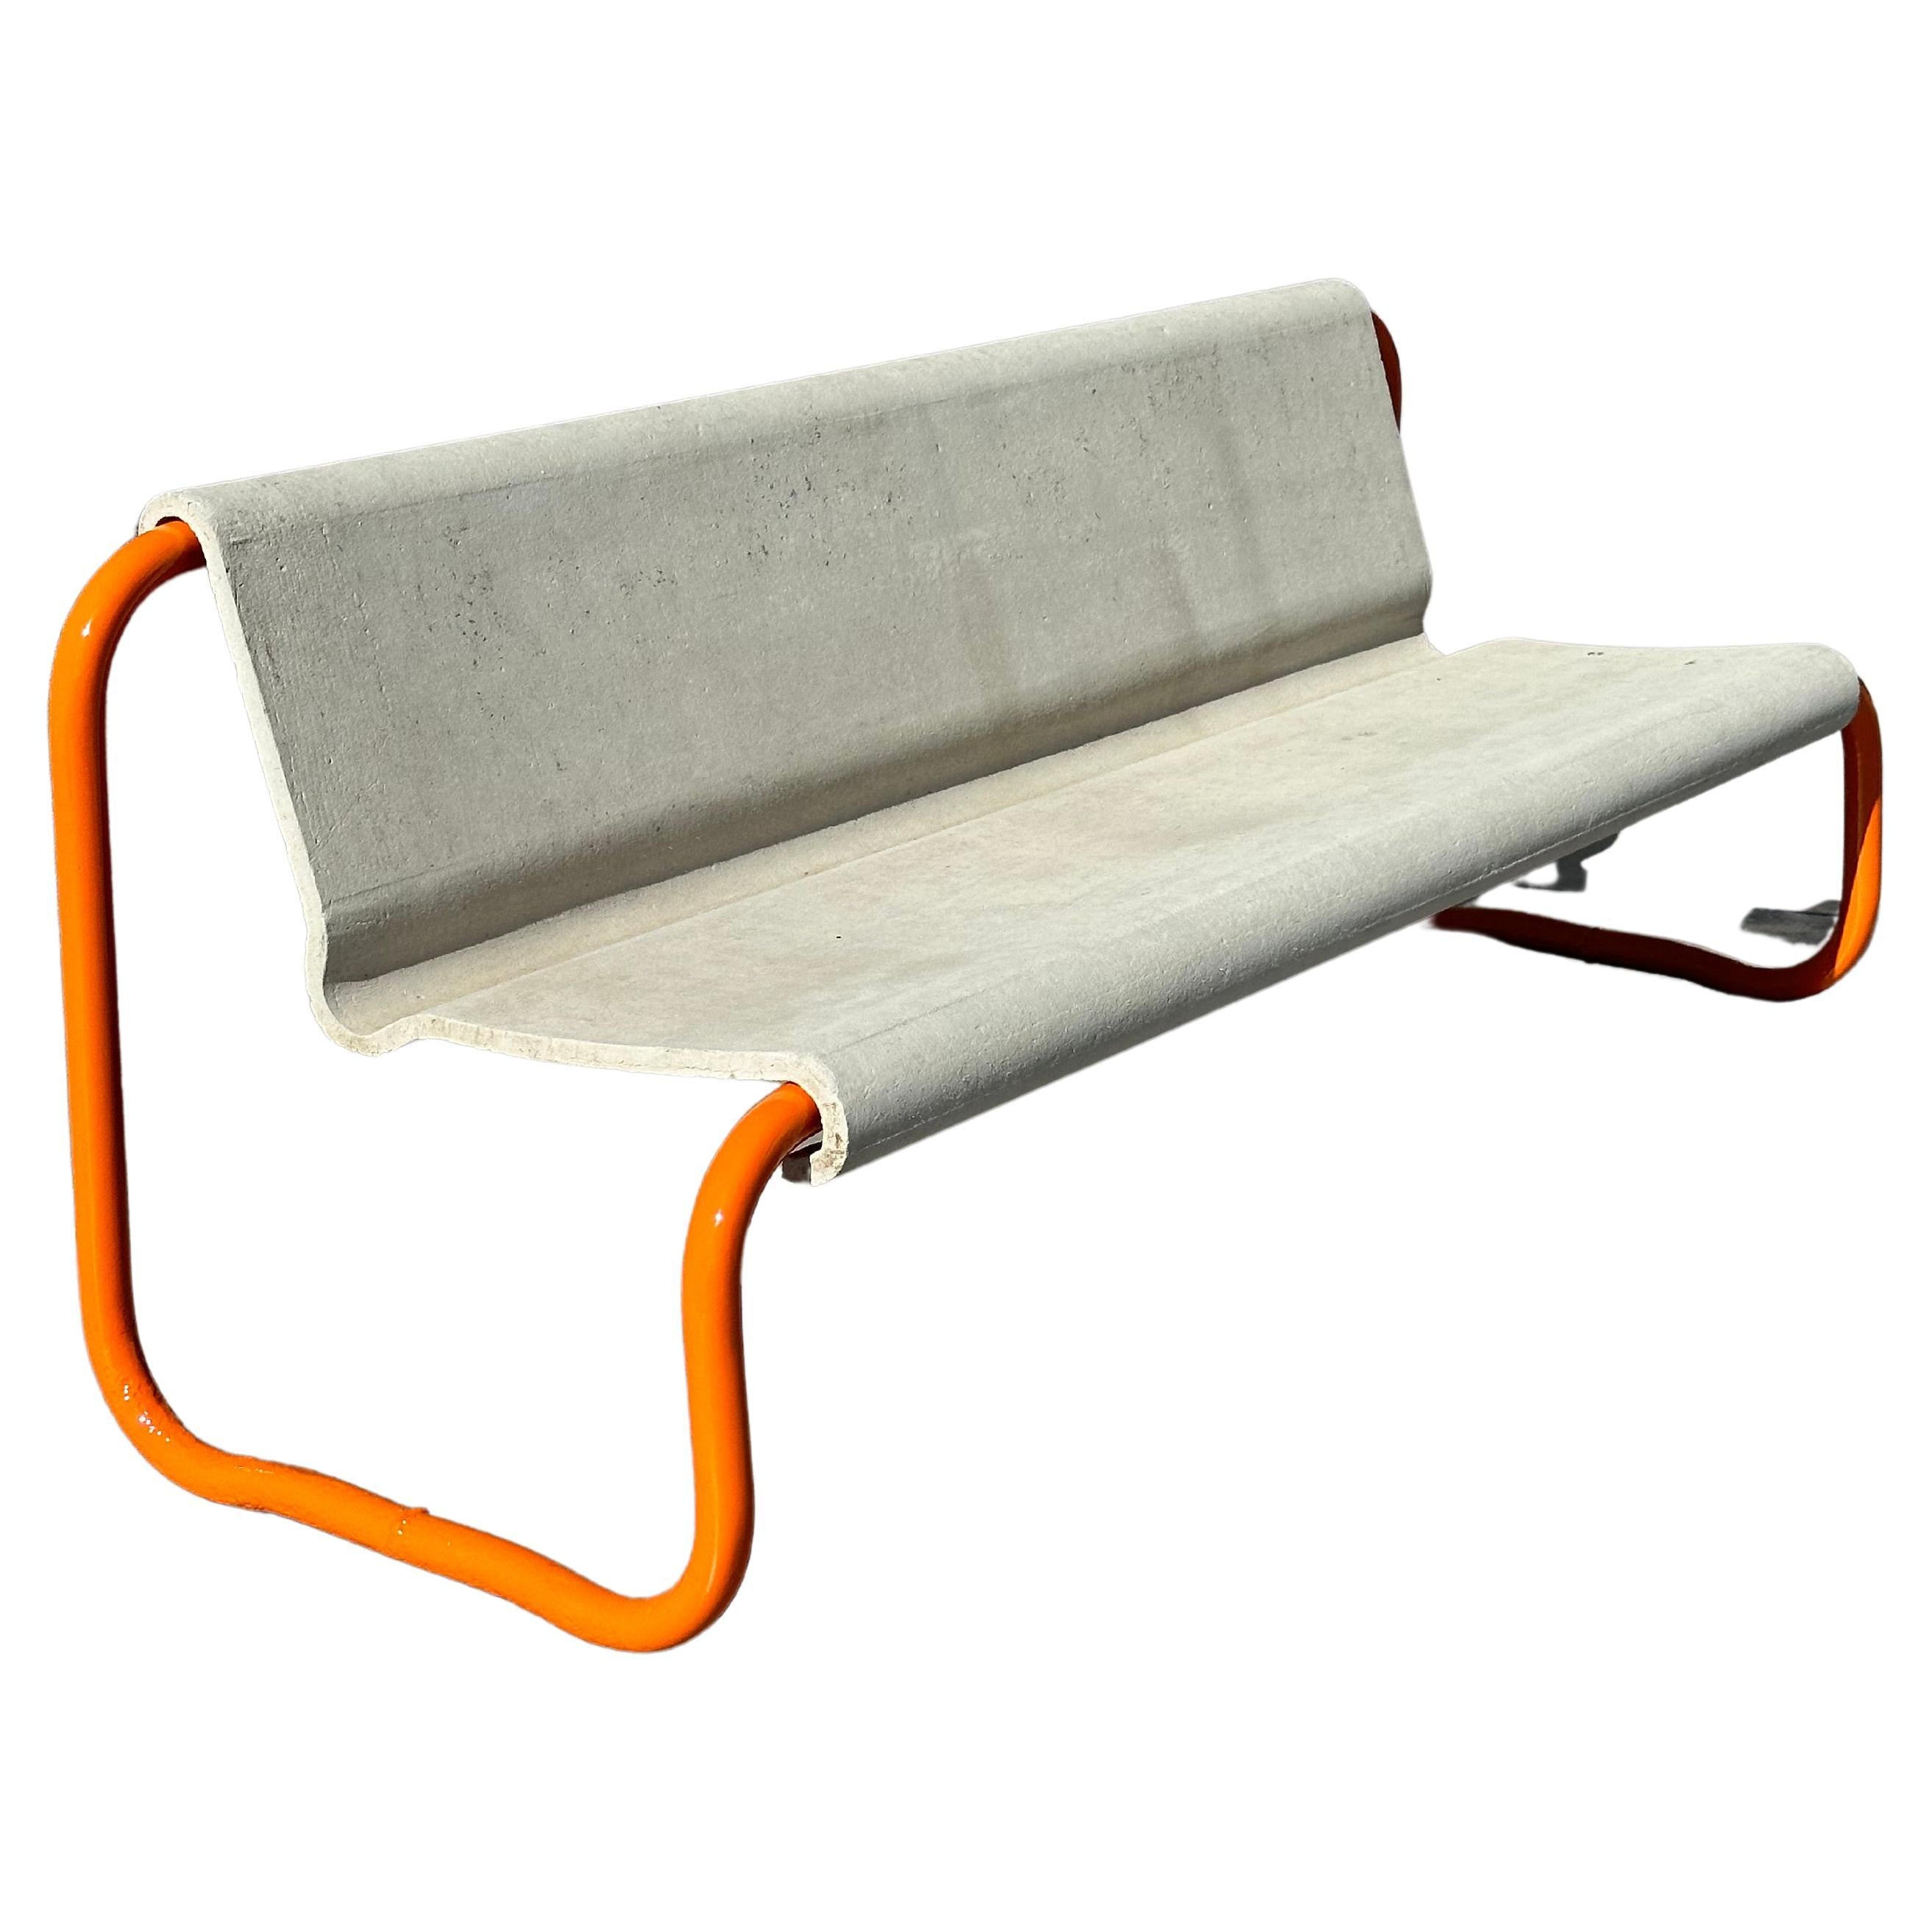 Willy Guhl Steel and Concrete Design Bench, Switzerland, 1950s For Sale